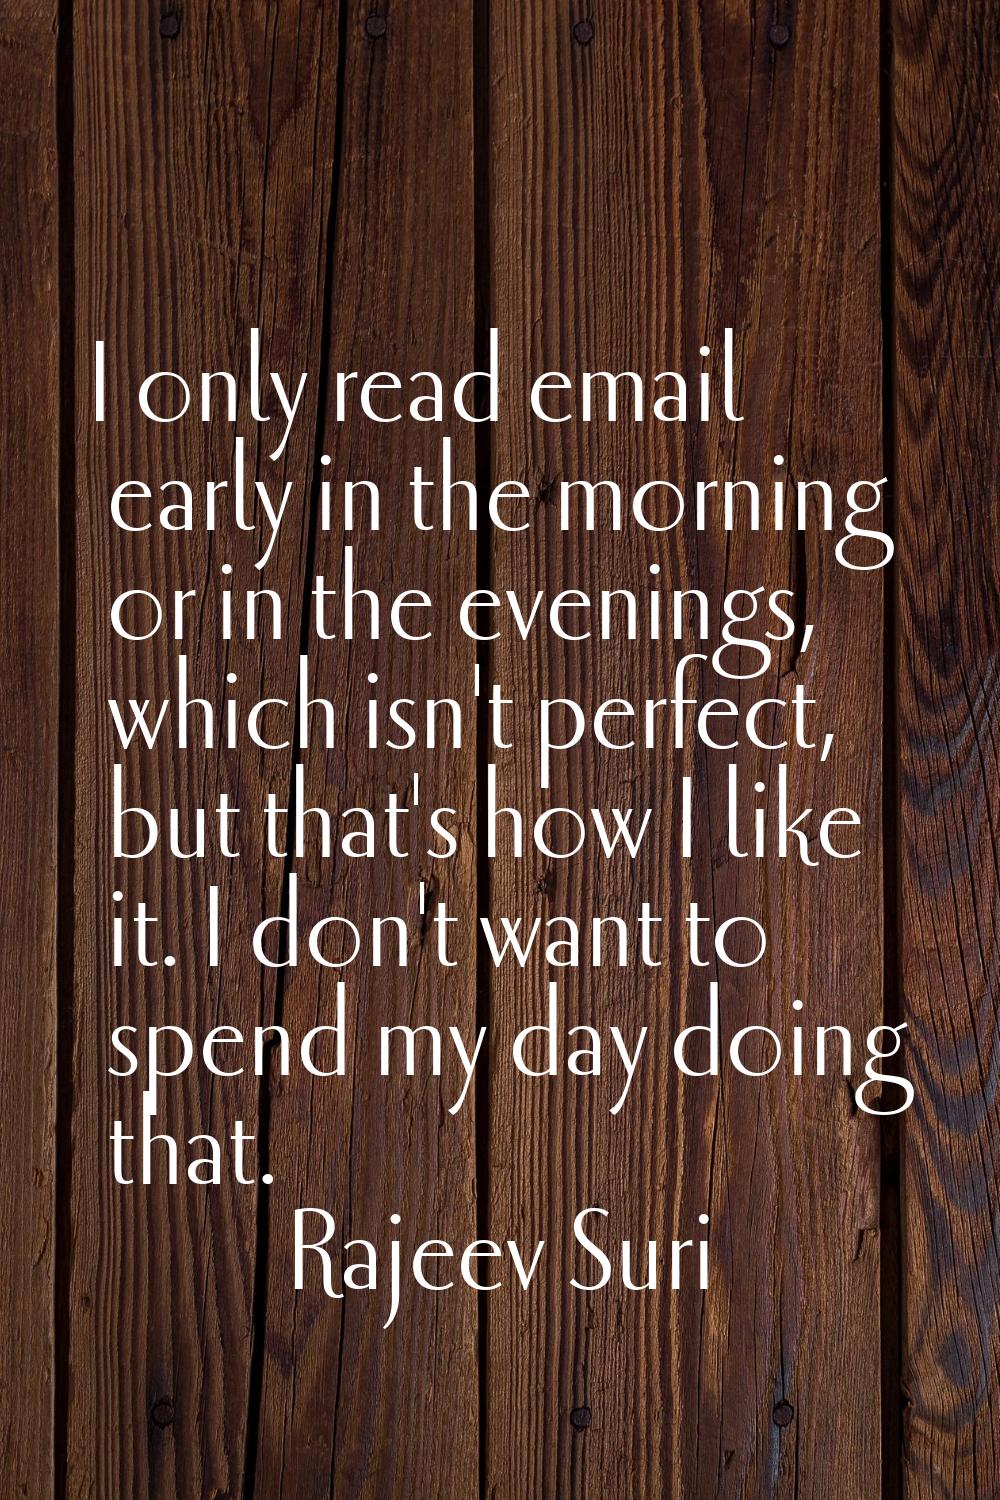 I only read email early in the morning or in the evenings, which isn't perfect, but that's how I li